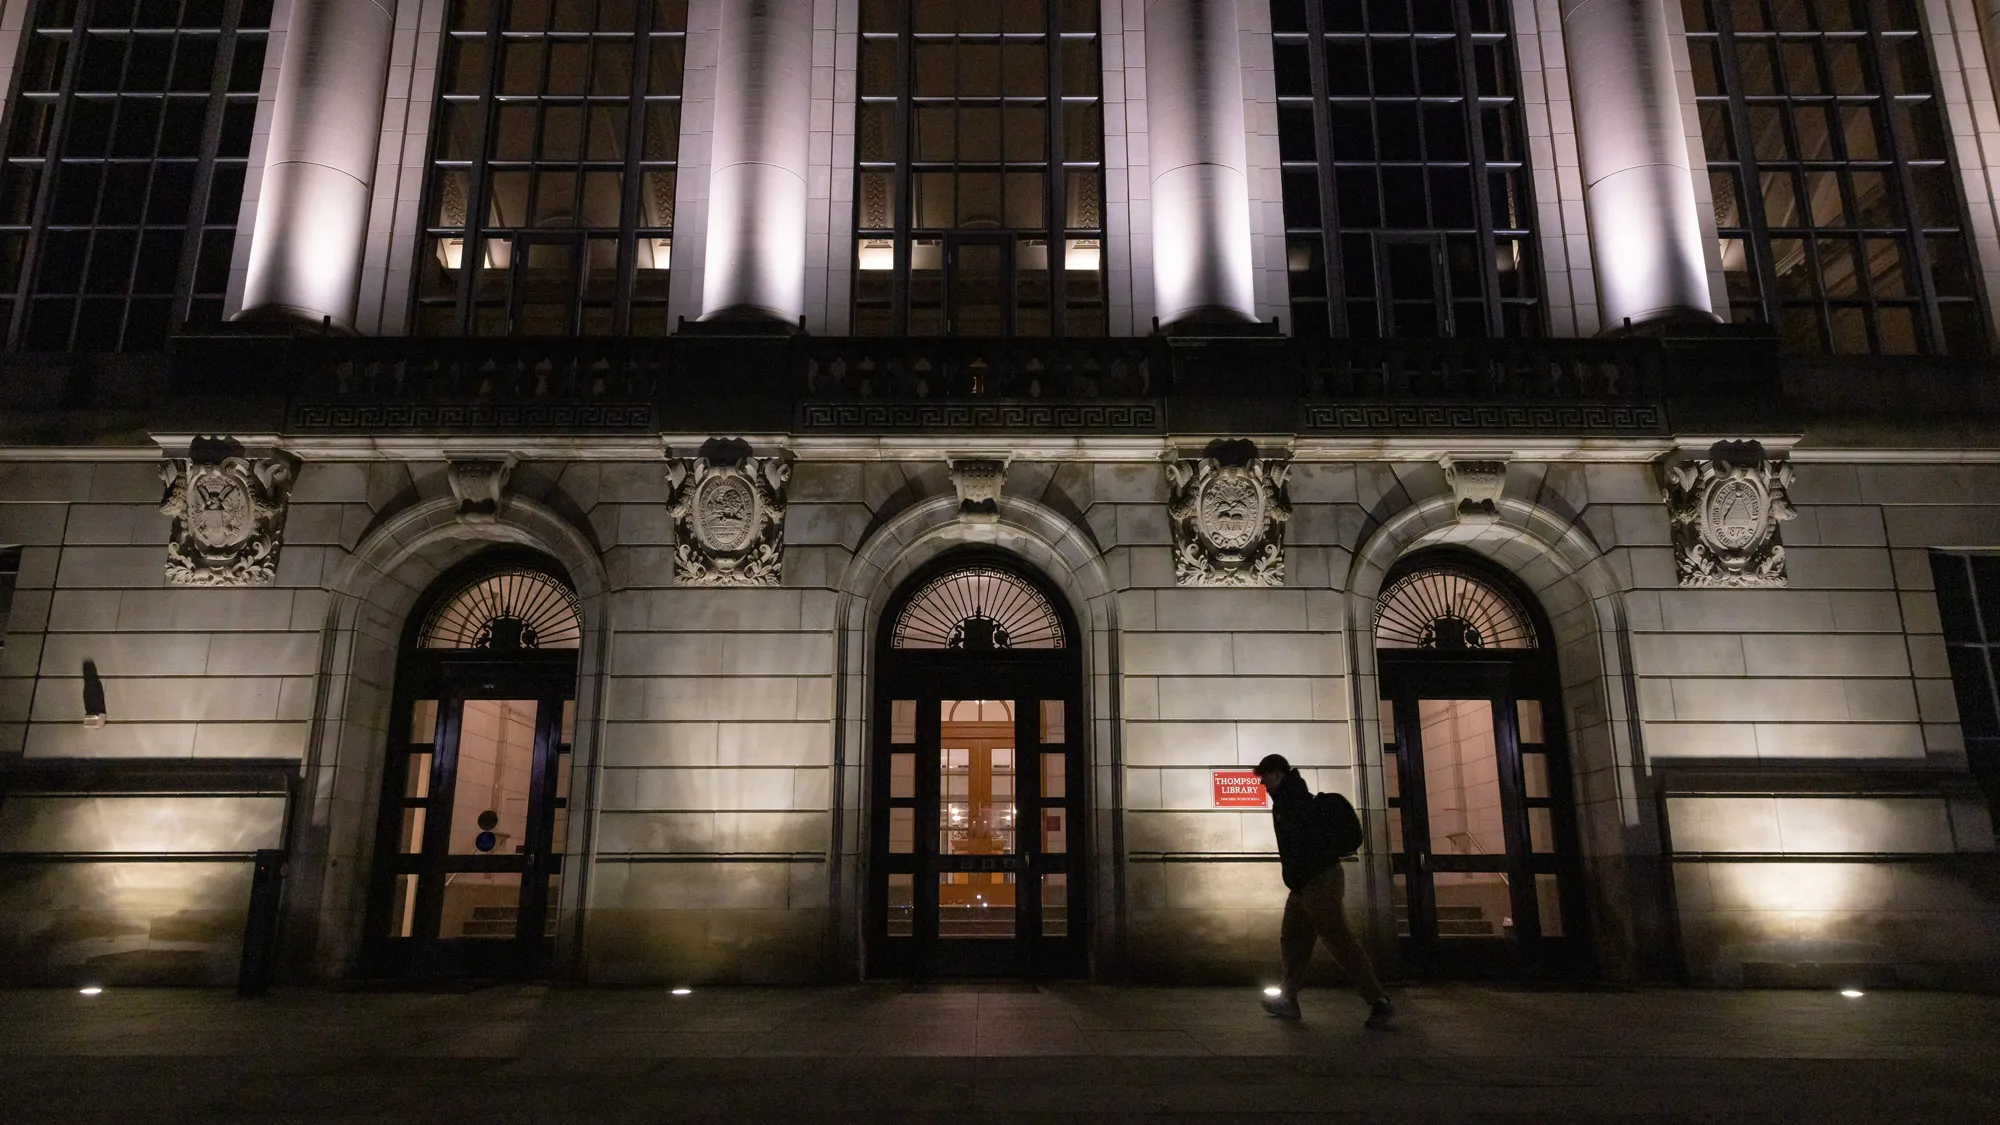 At night, a student passes by on the Oval side of the library. Only the silhouette of the student can be seen. Lights shining on the building highlight the stately architecture. 